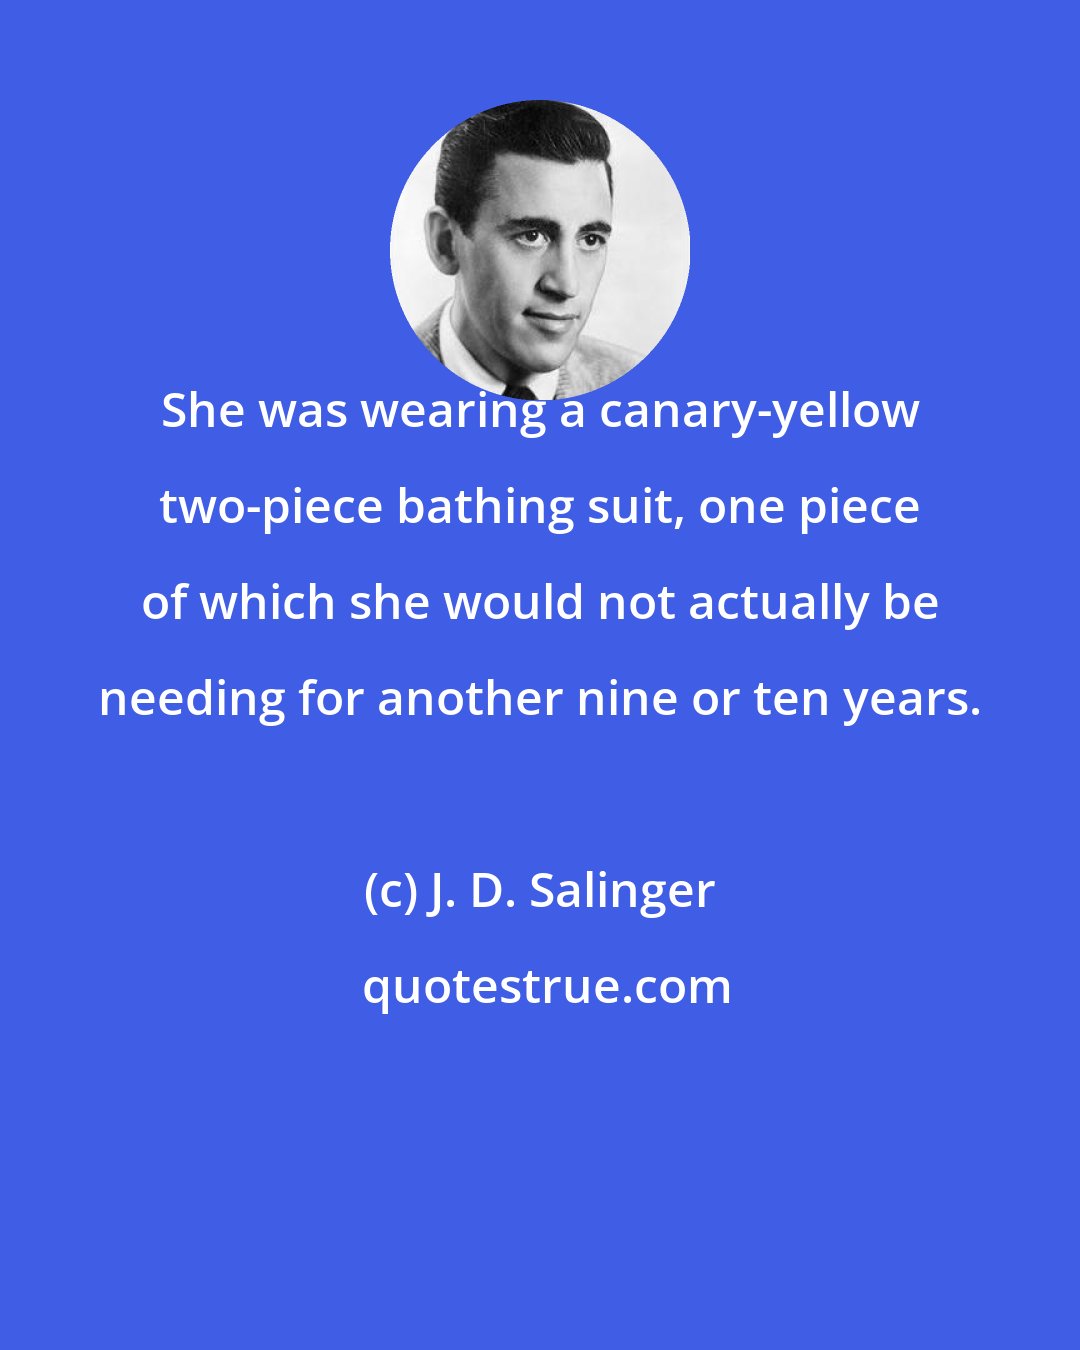 J. D. Salinger: She was wearing a canary-yellow two-piece bathing suit, one piece of which she would not actually be needing for another nine or ten years.